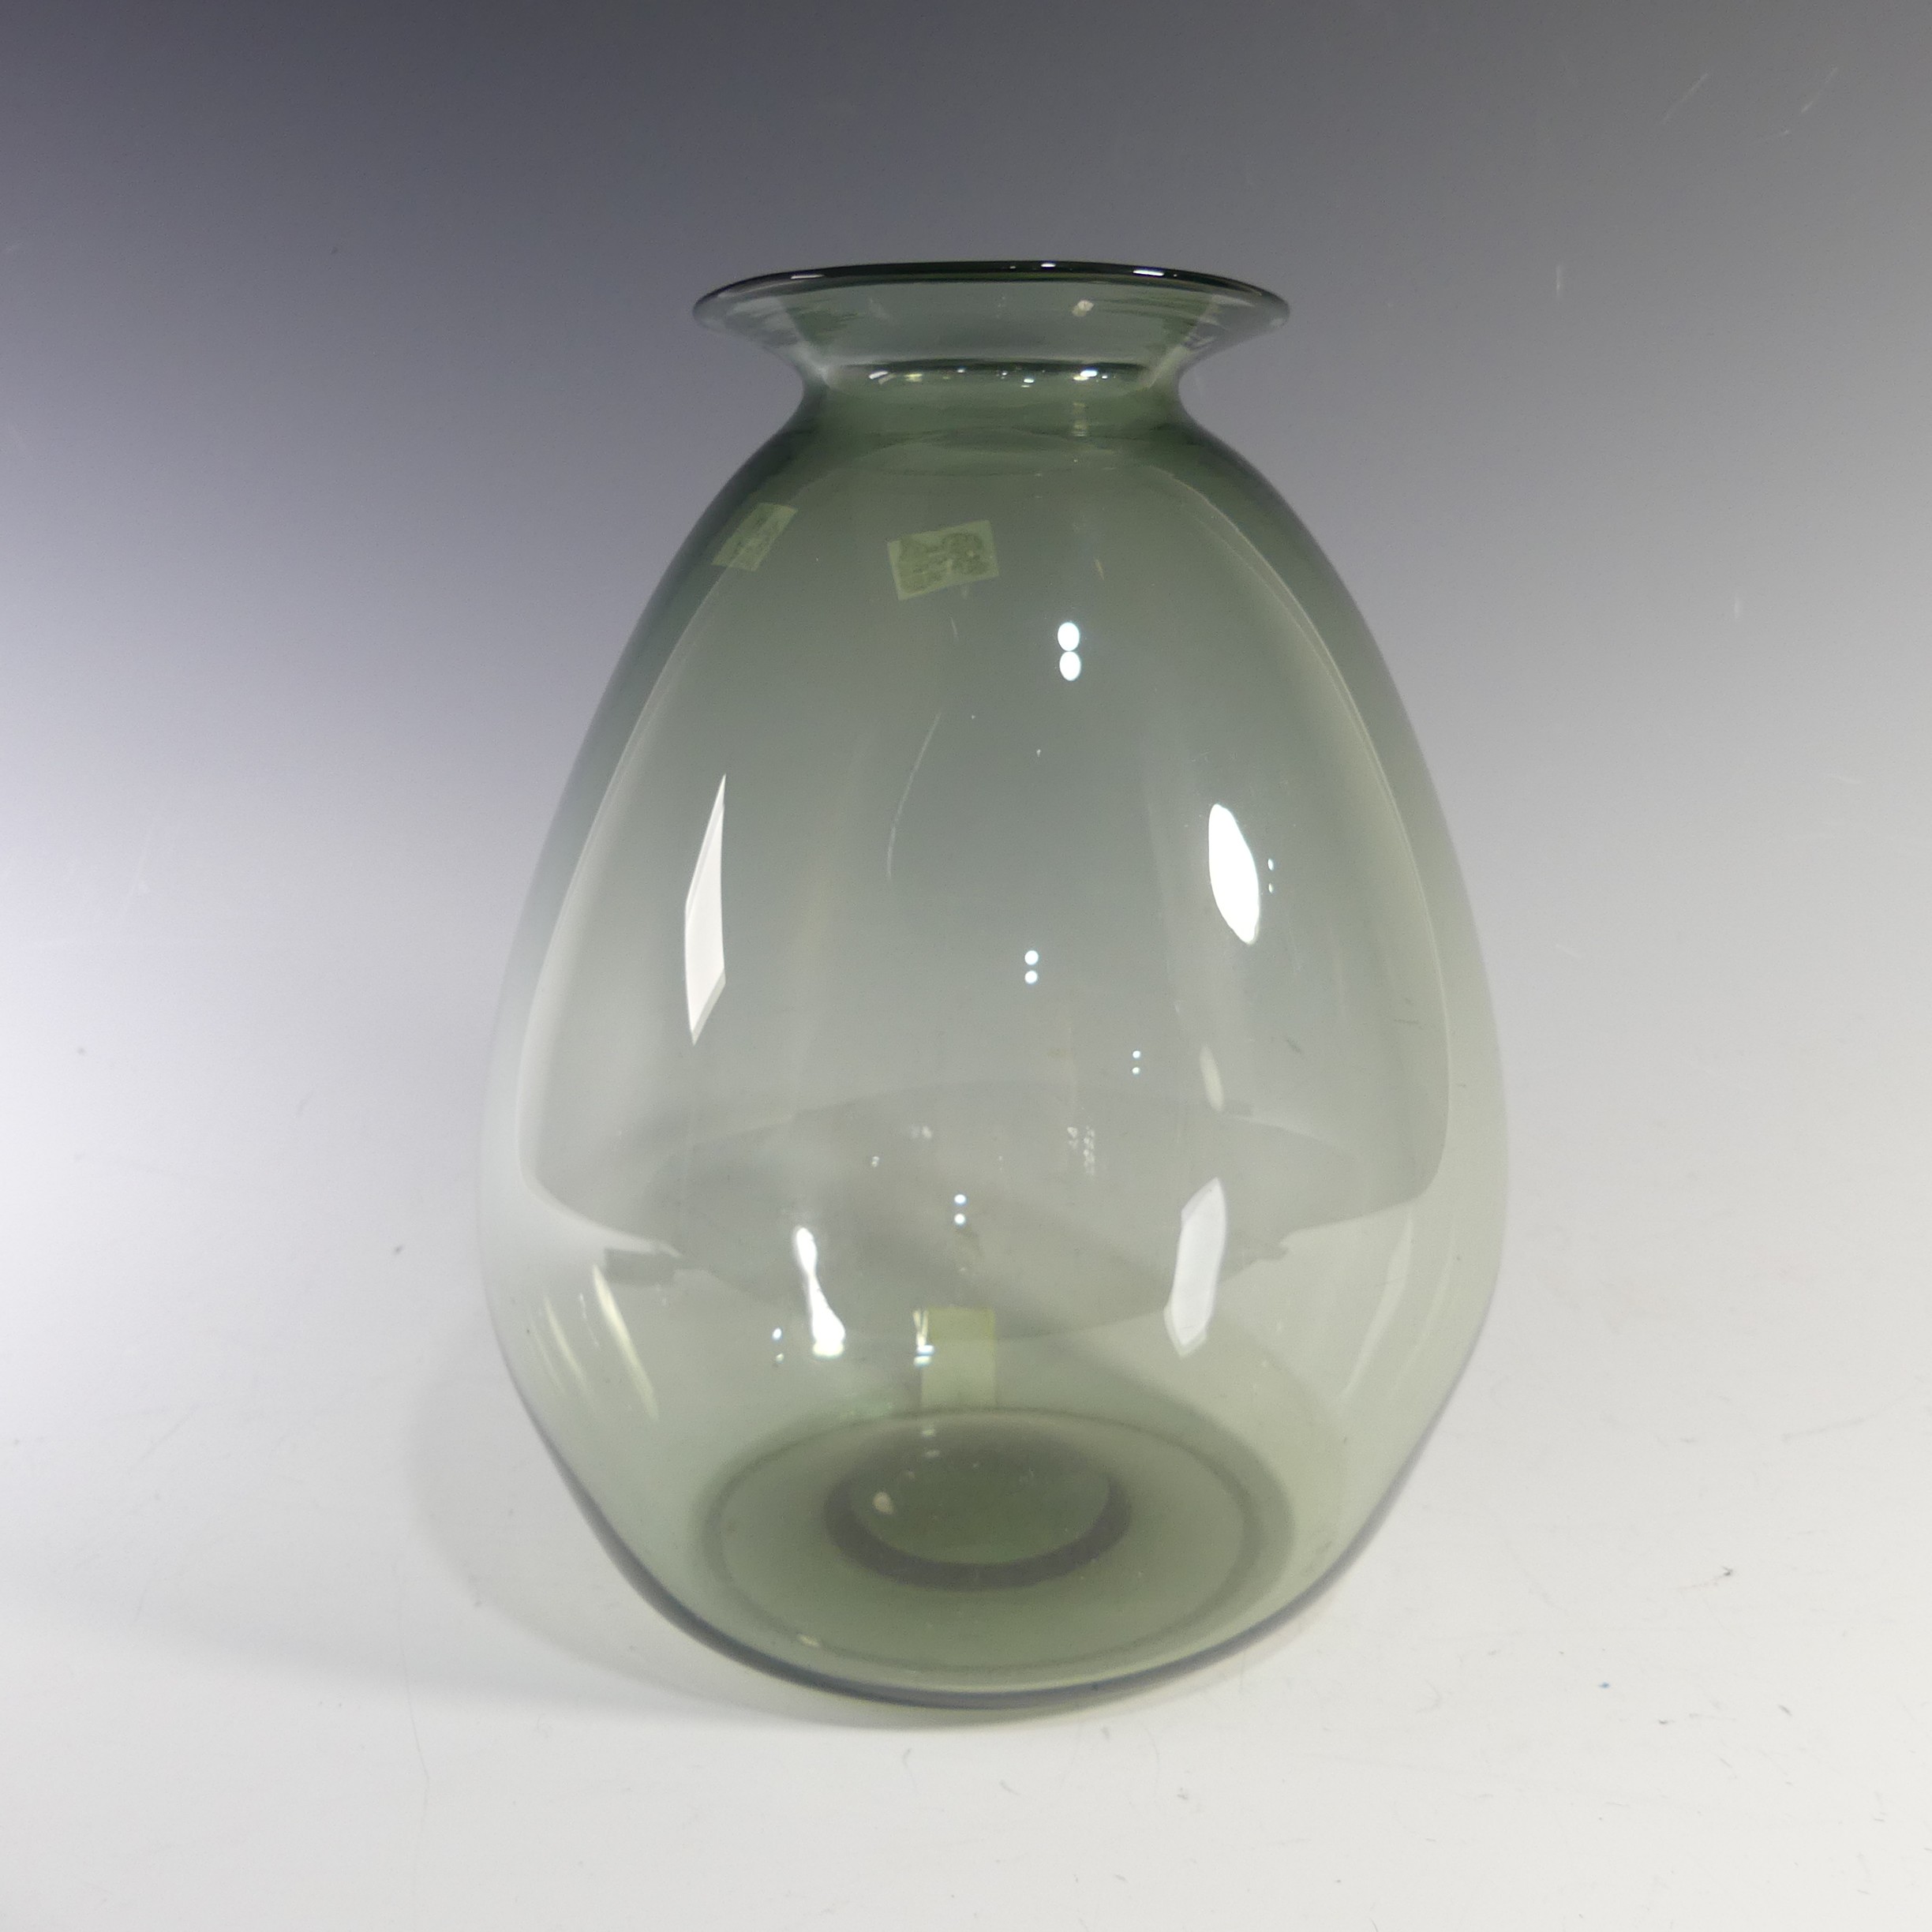 A Keith Murray for Brierley glass Vase, with flared rim and bulbous body, dark green shade, etched